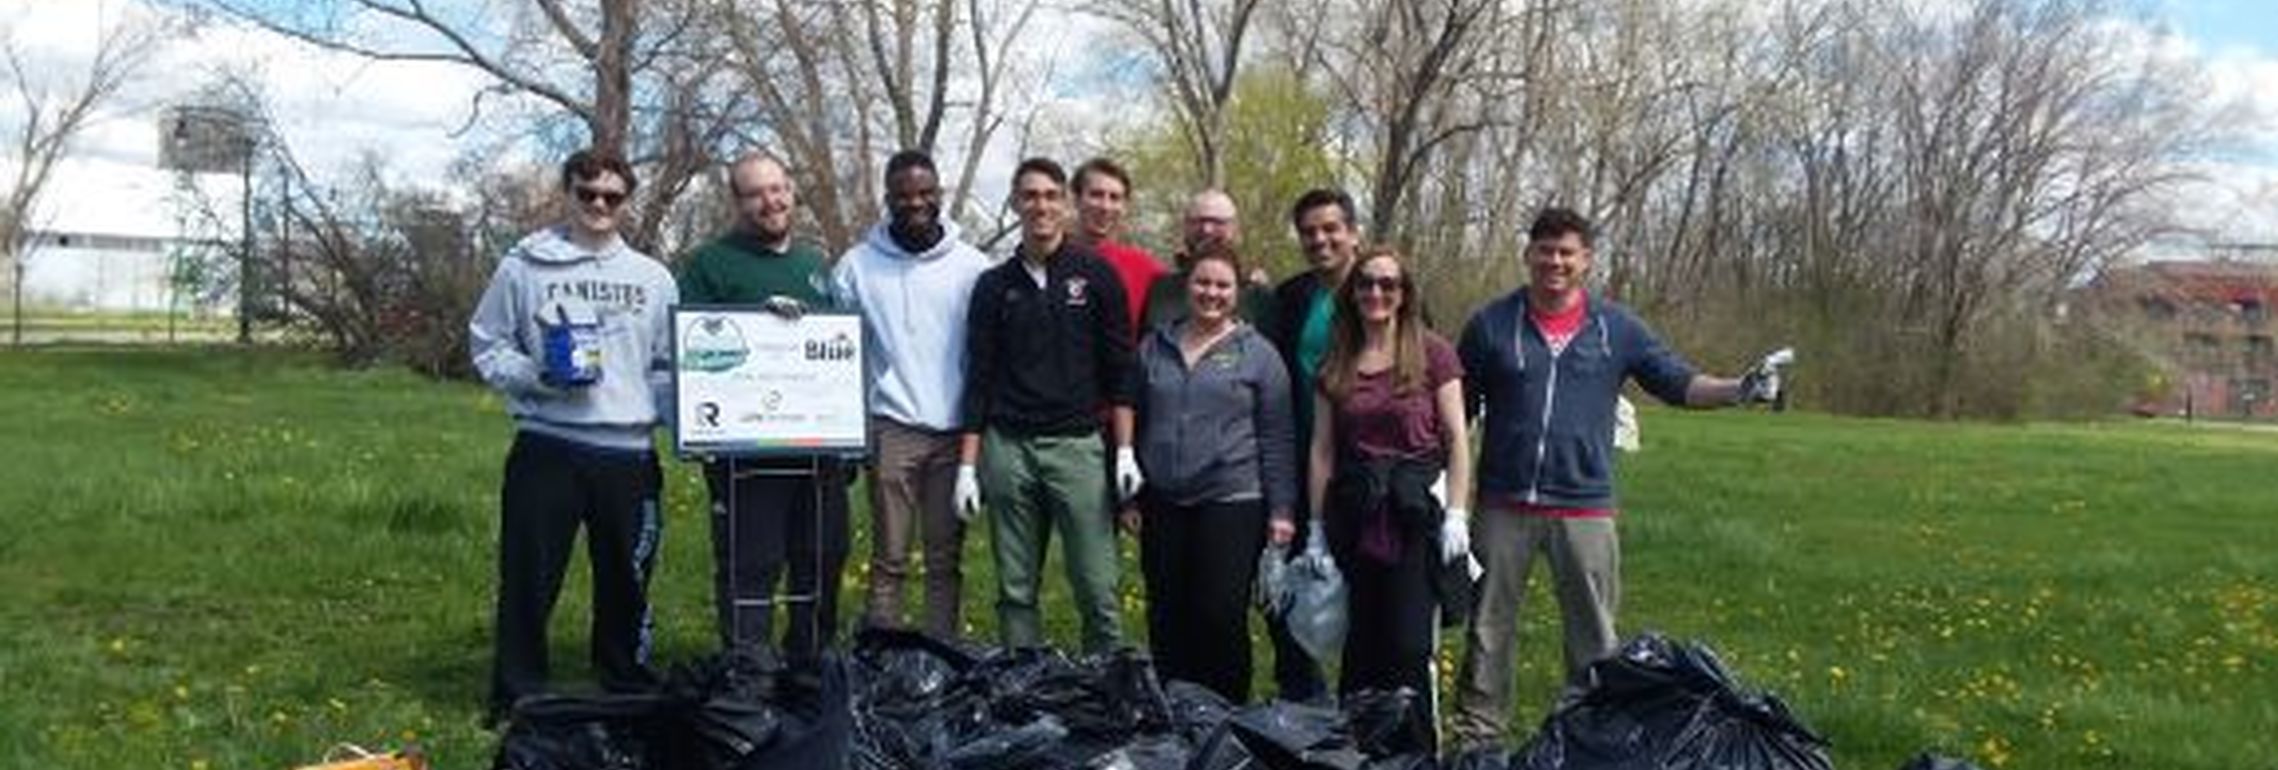 BUFFALO RIVER CLEANUP FOR A BLUER BLUEWAY!